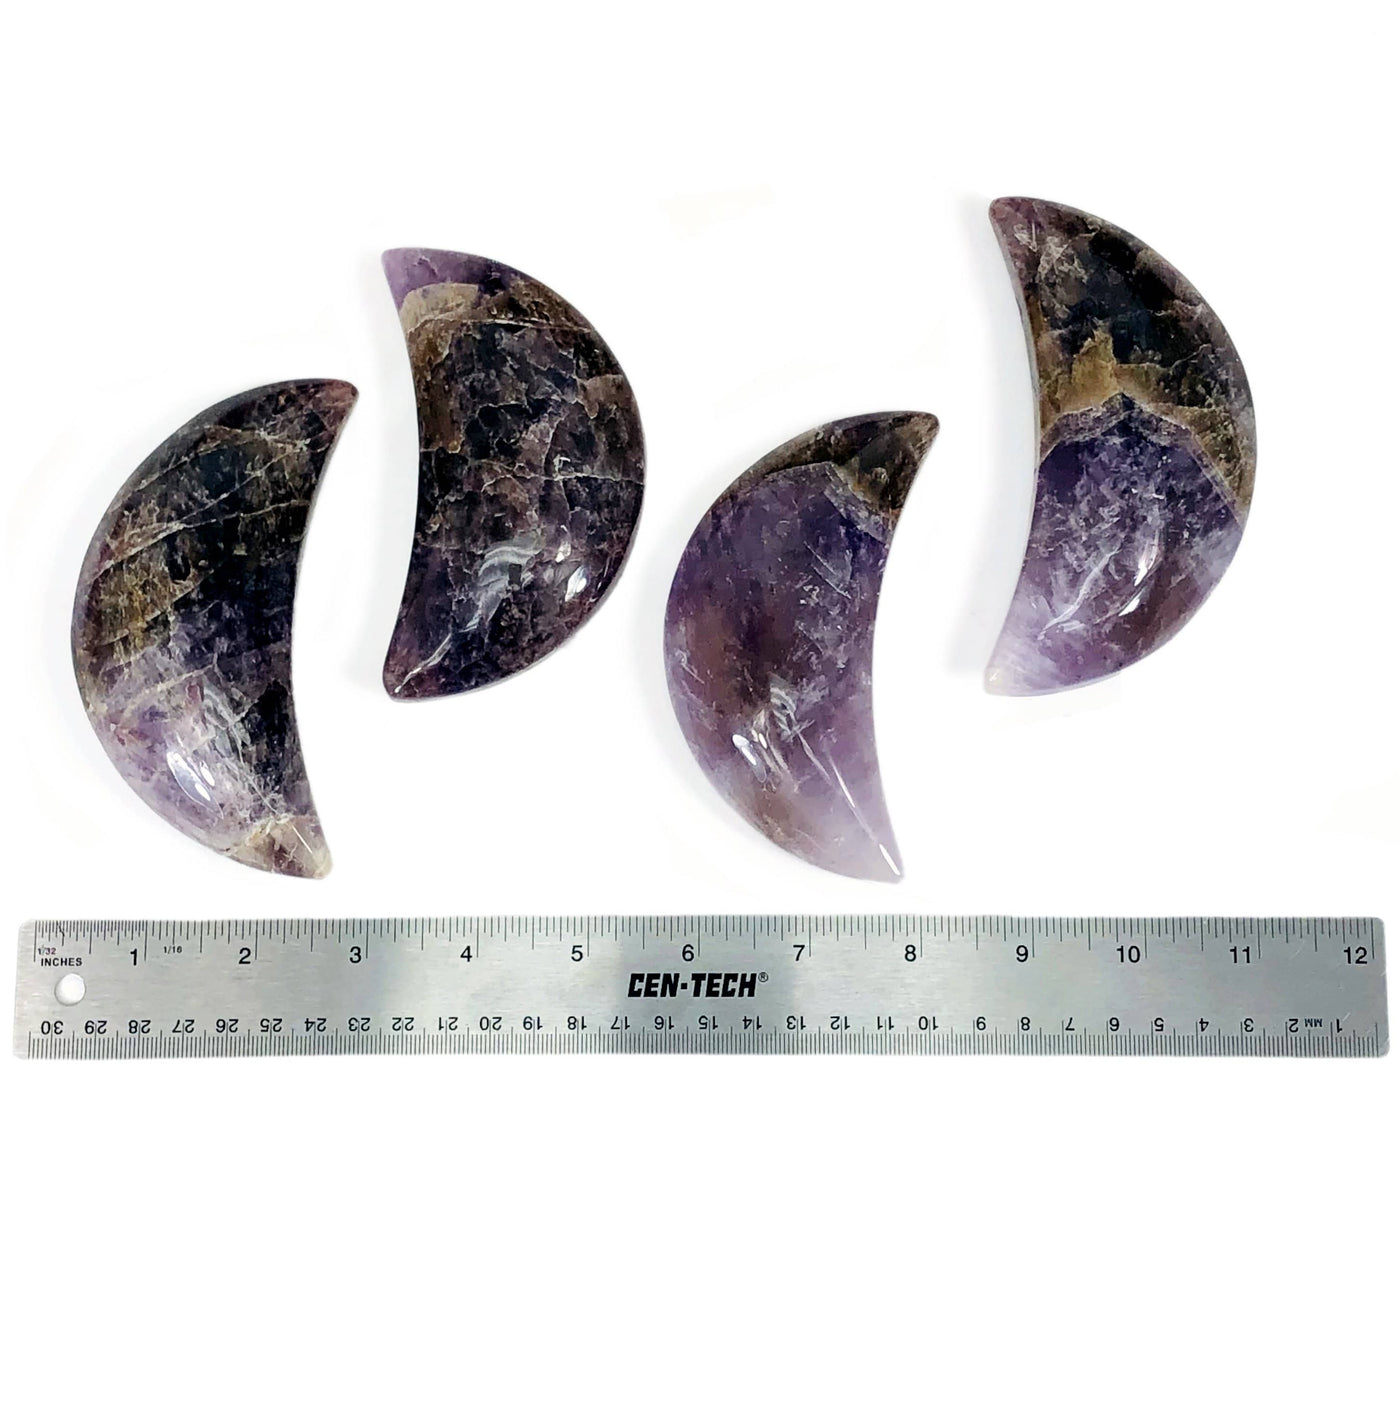 four seven minerals in one polished moons with ruler for size reference